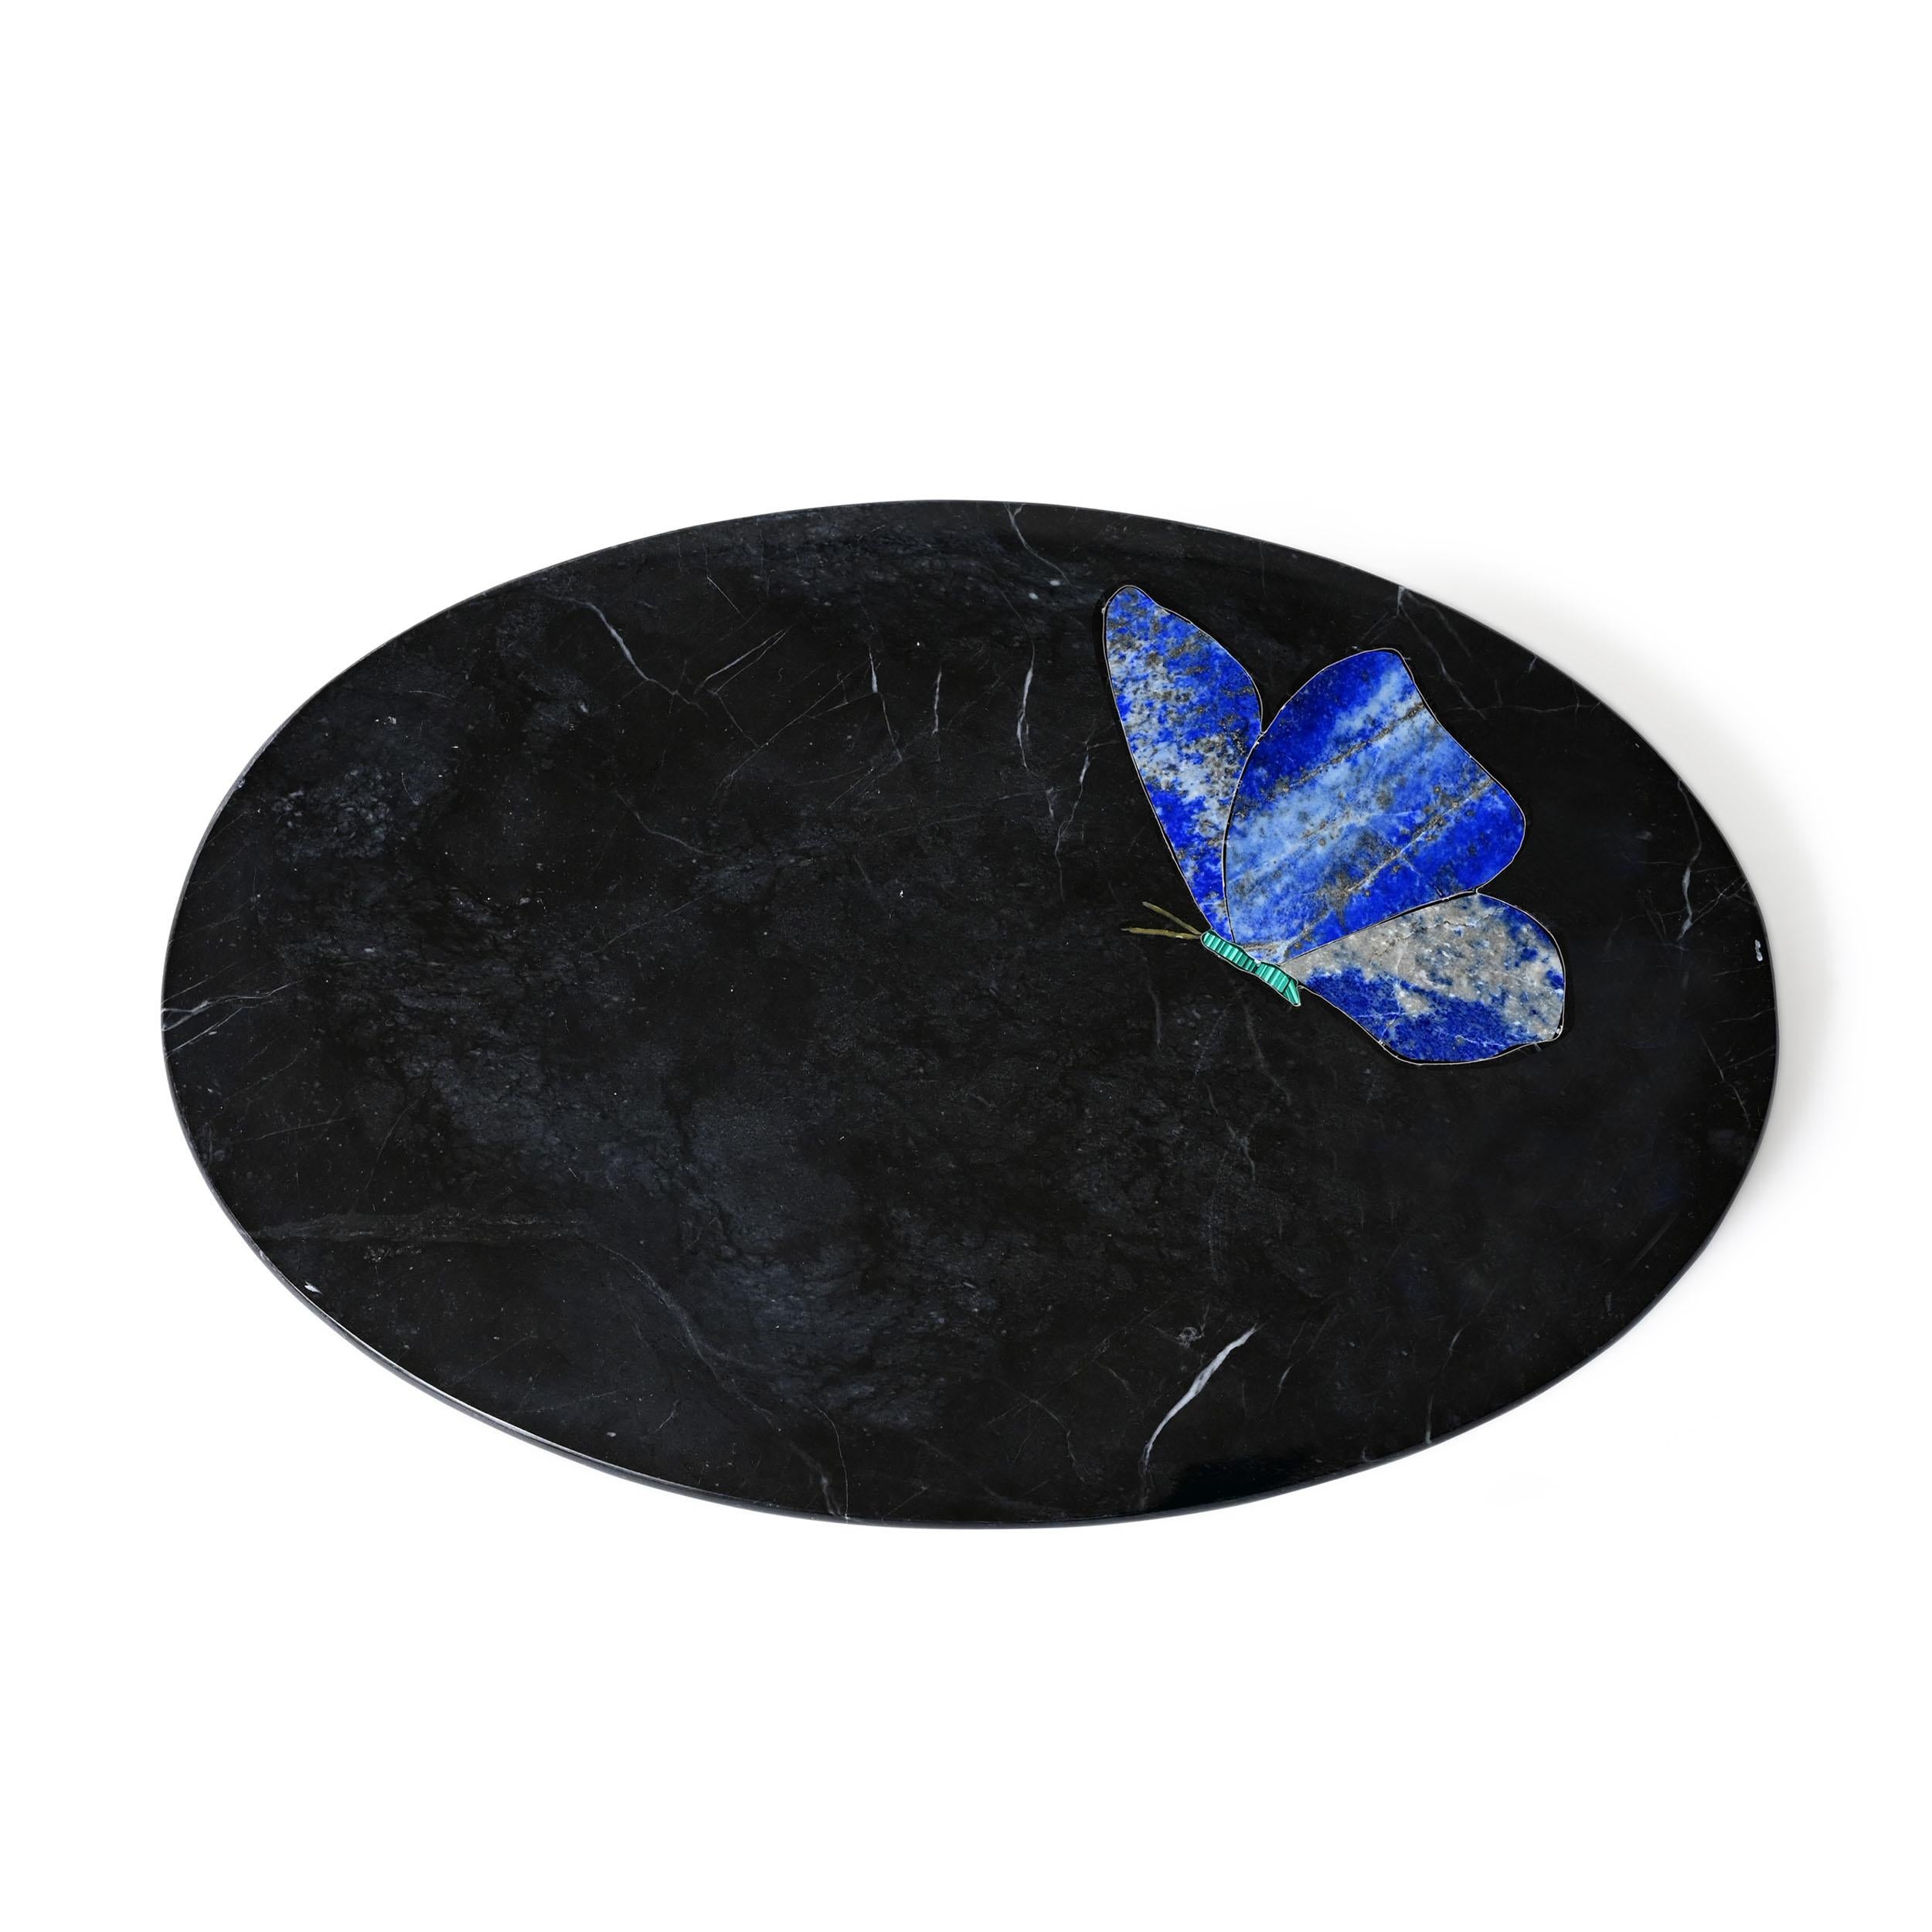 Parvaneh platter II by Studio Lel
Dimensions: D30.5 x H30.5 x H2.5 cm
Materials: Marble.

The word Ara is the onomatopoeic genus of the macaw, referencing the sounds made by the bright parrots depicted in every piece of the collection. Set in